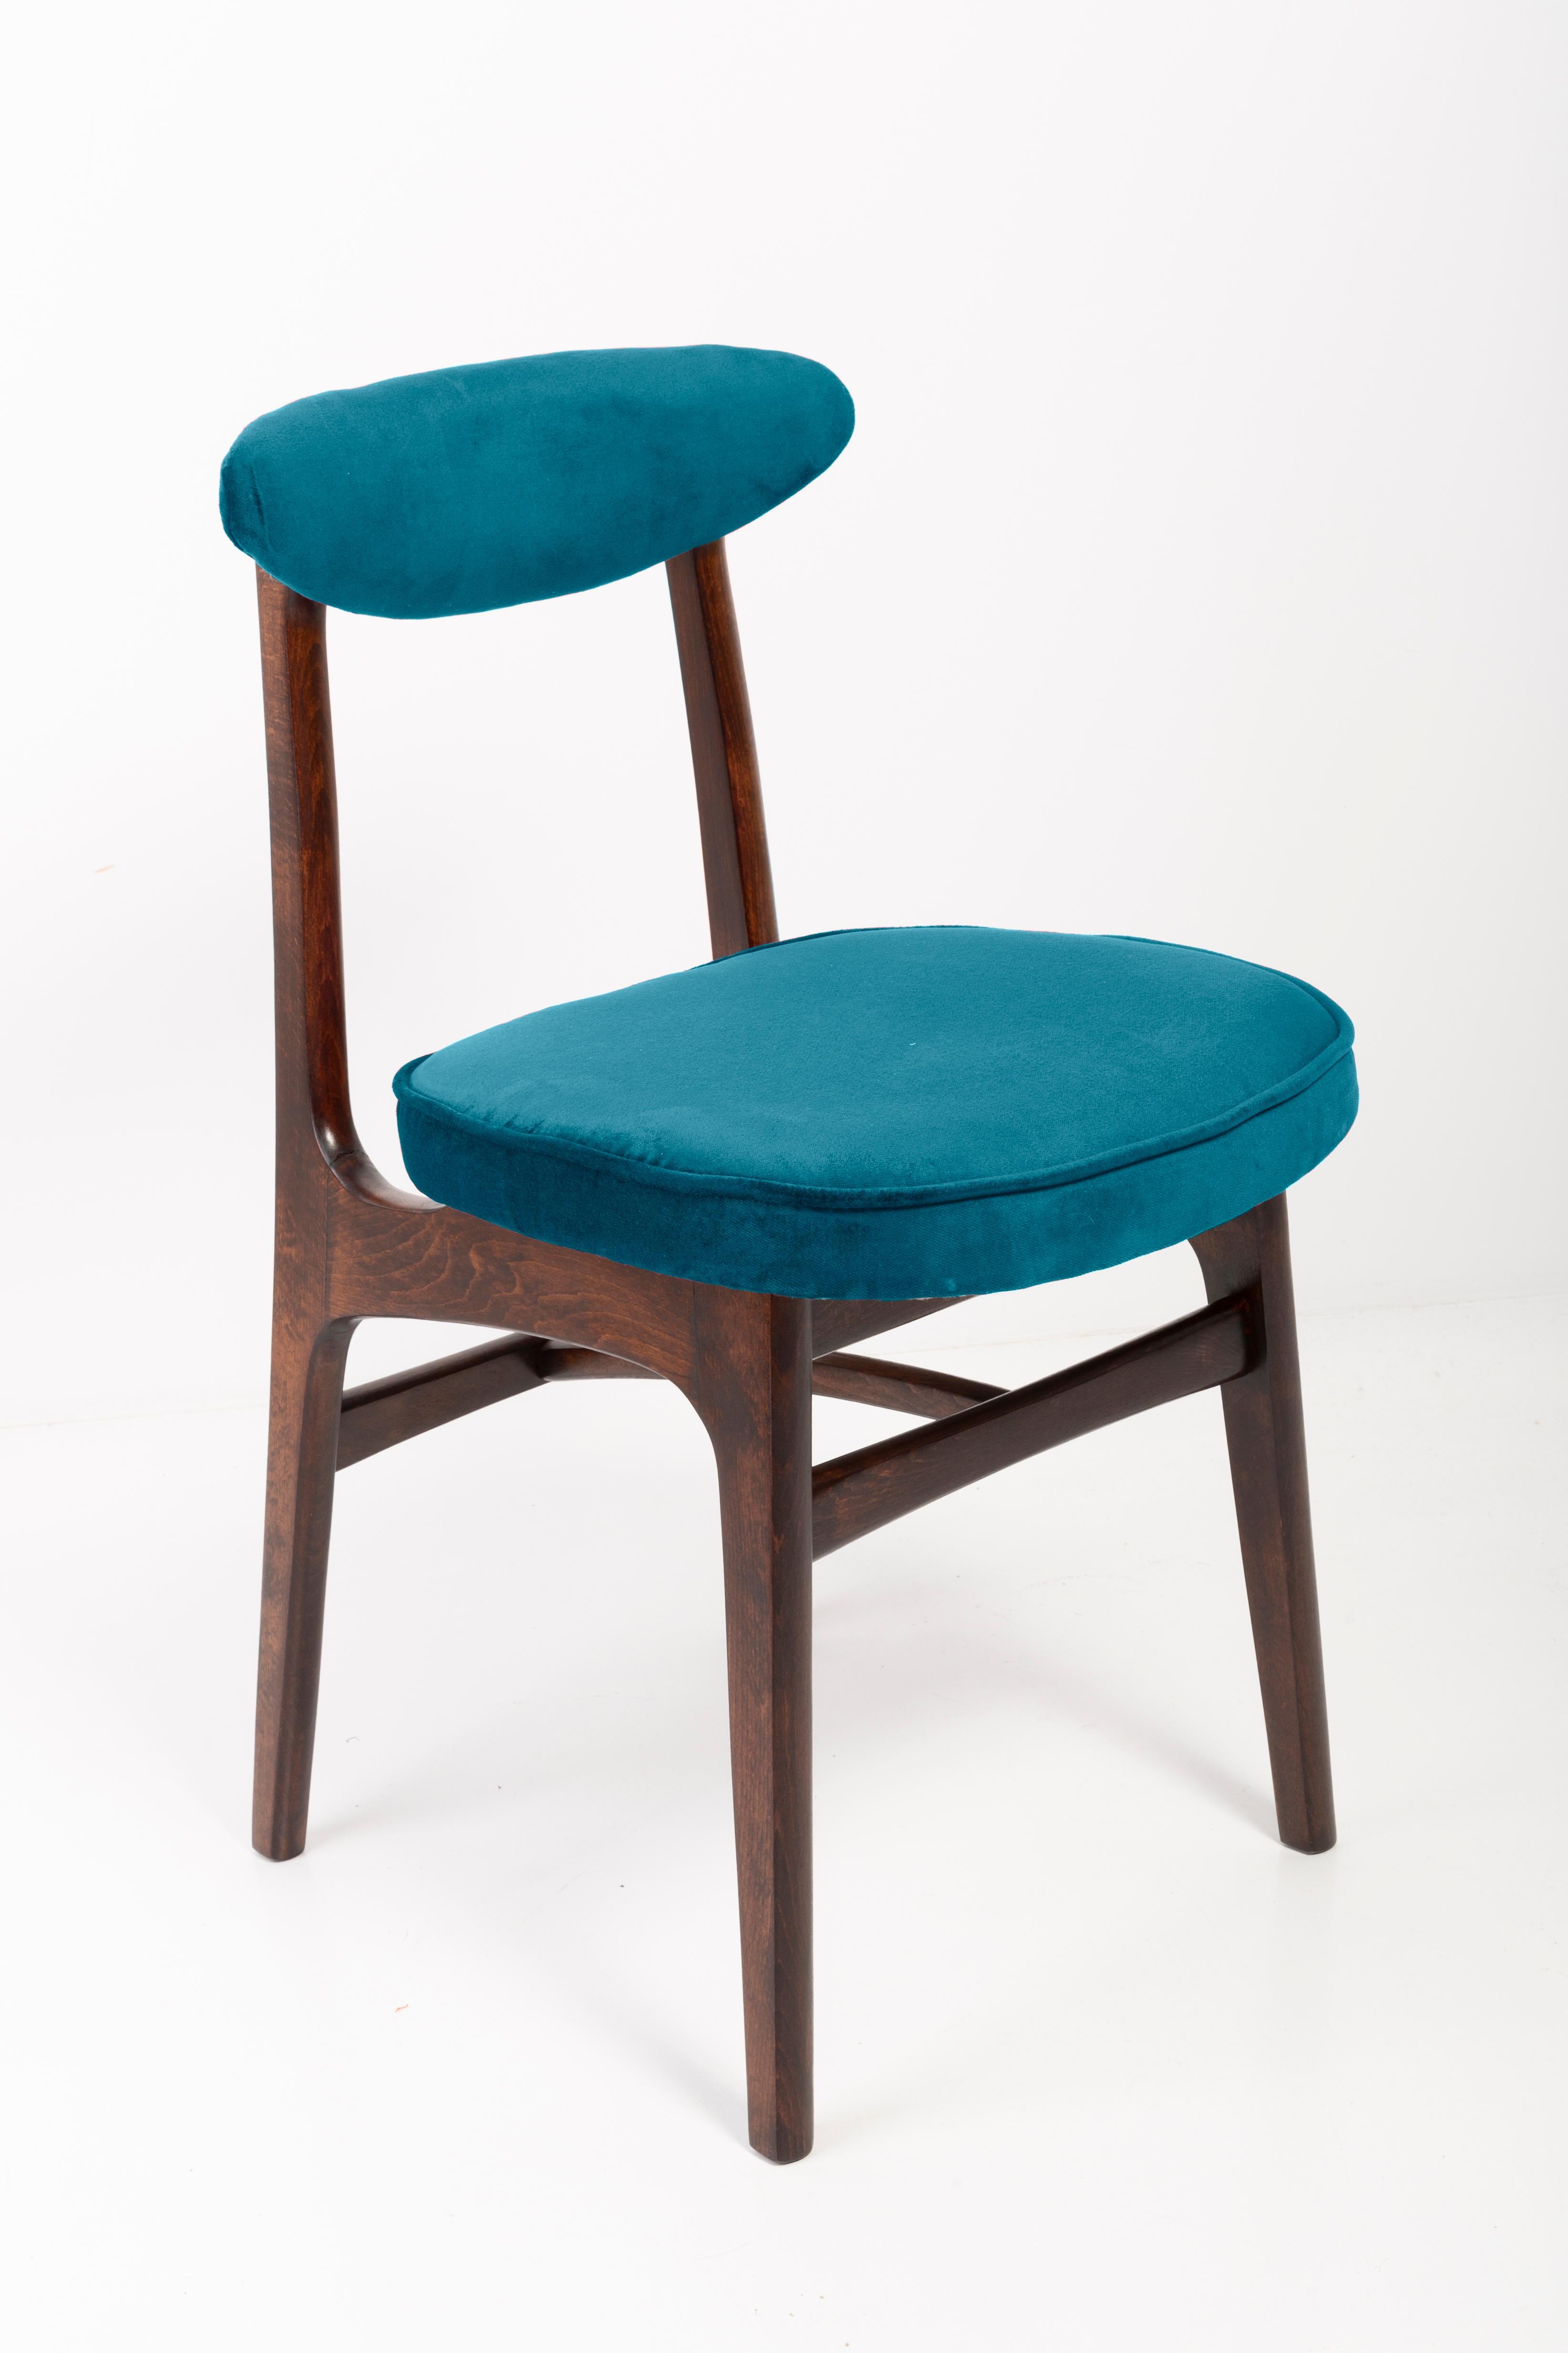 Six chairs designed by Prof. Rajmund Halas. It has been made of beechwood. Chairs are after undergone a complete upholstery renovation, the woodwork has been refreshed. Seats and backs were dressed in a petrol blue (color 973), durable and pleasant